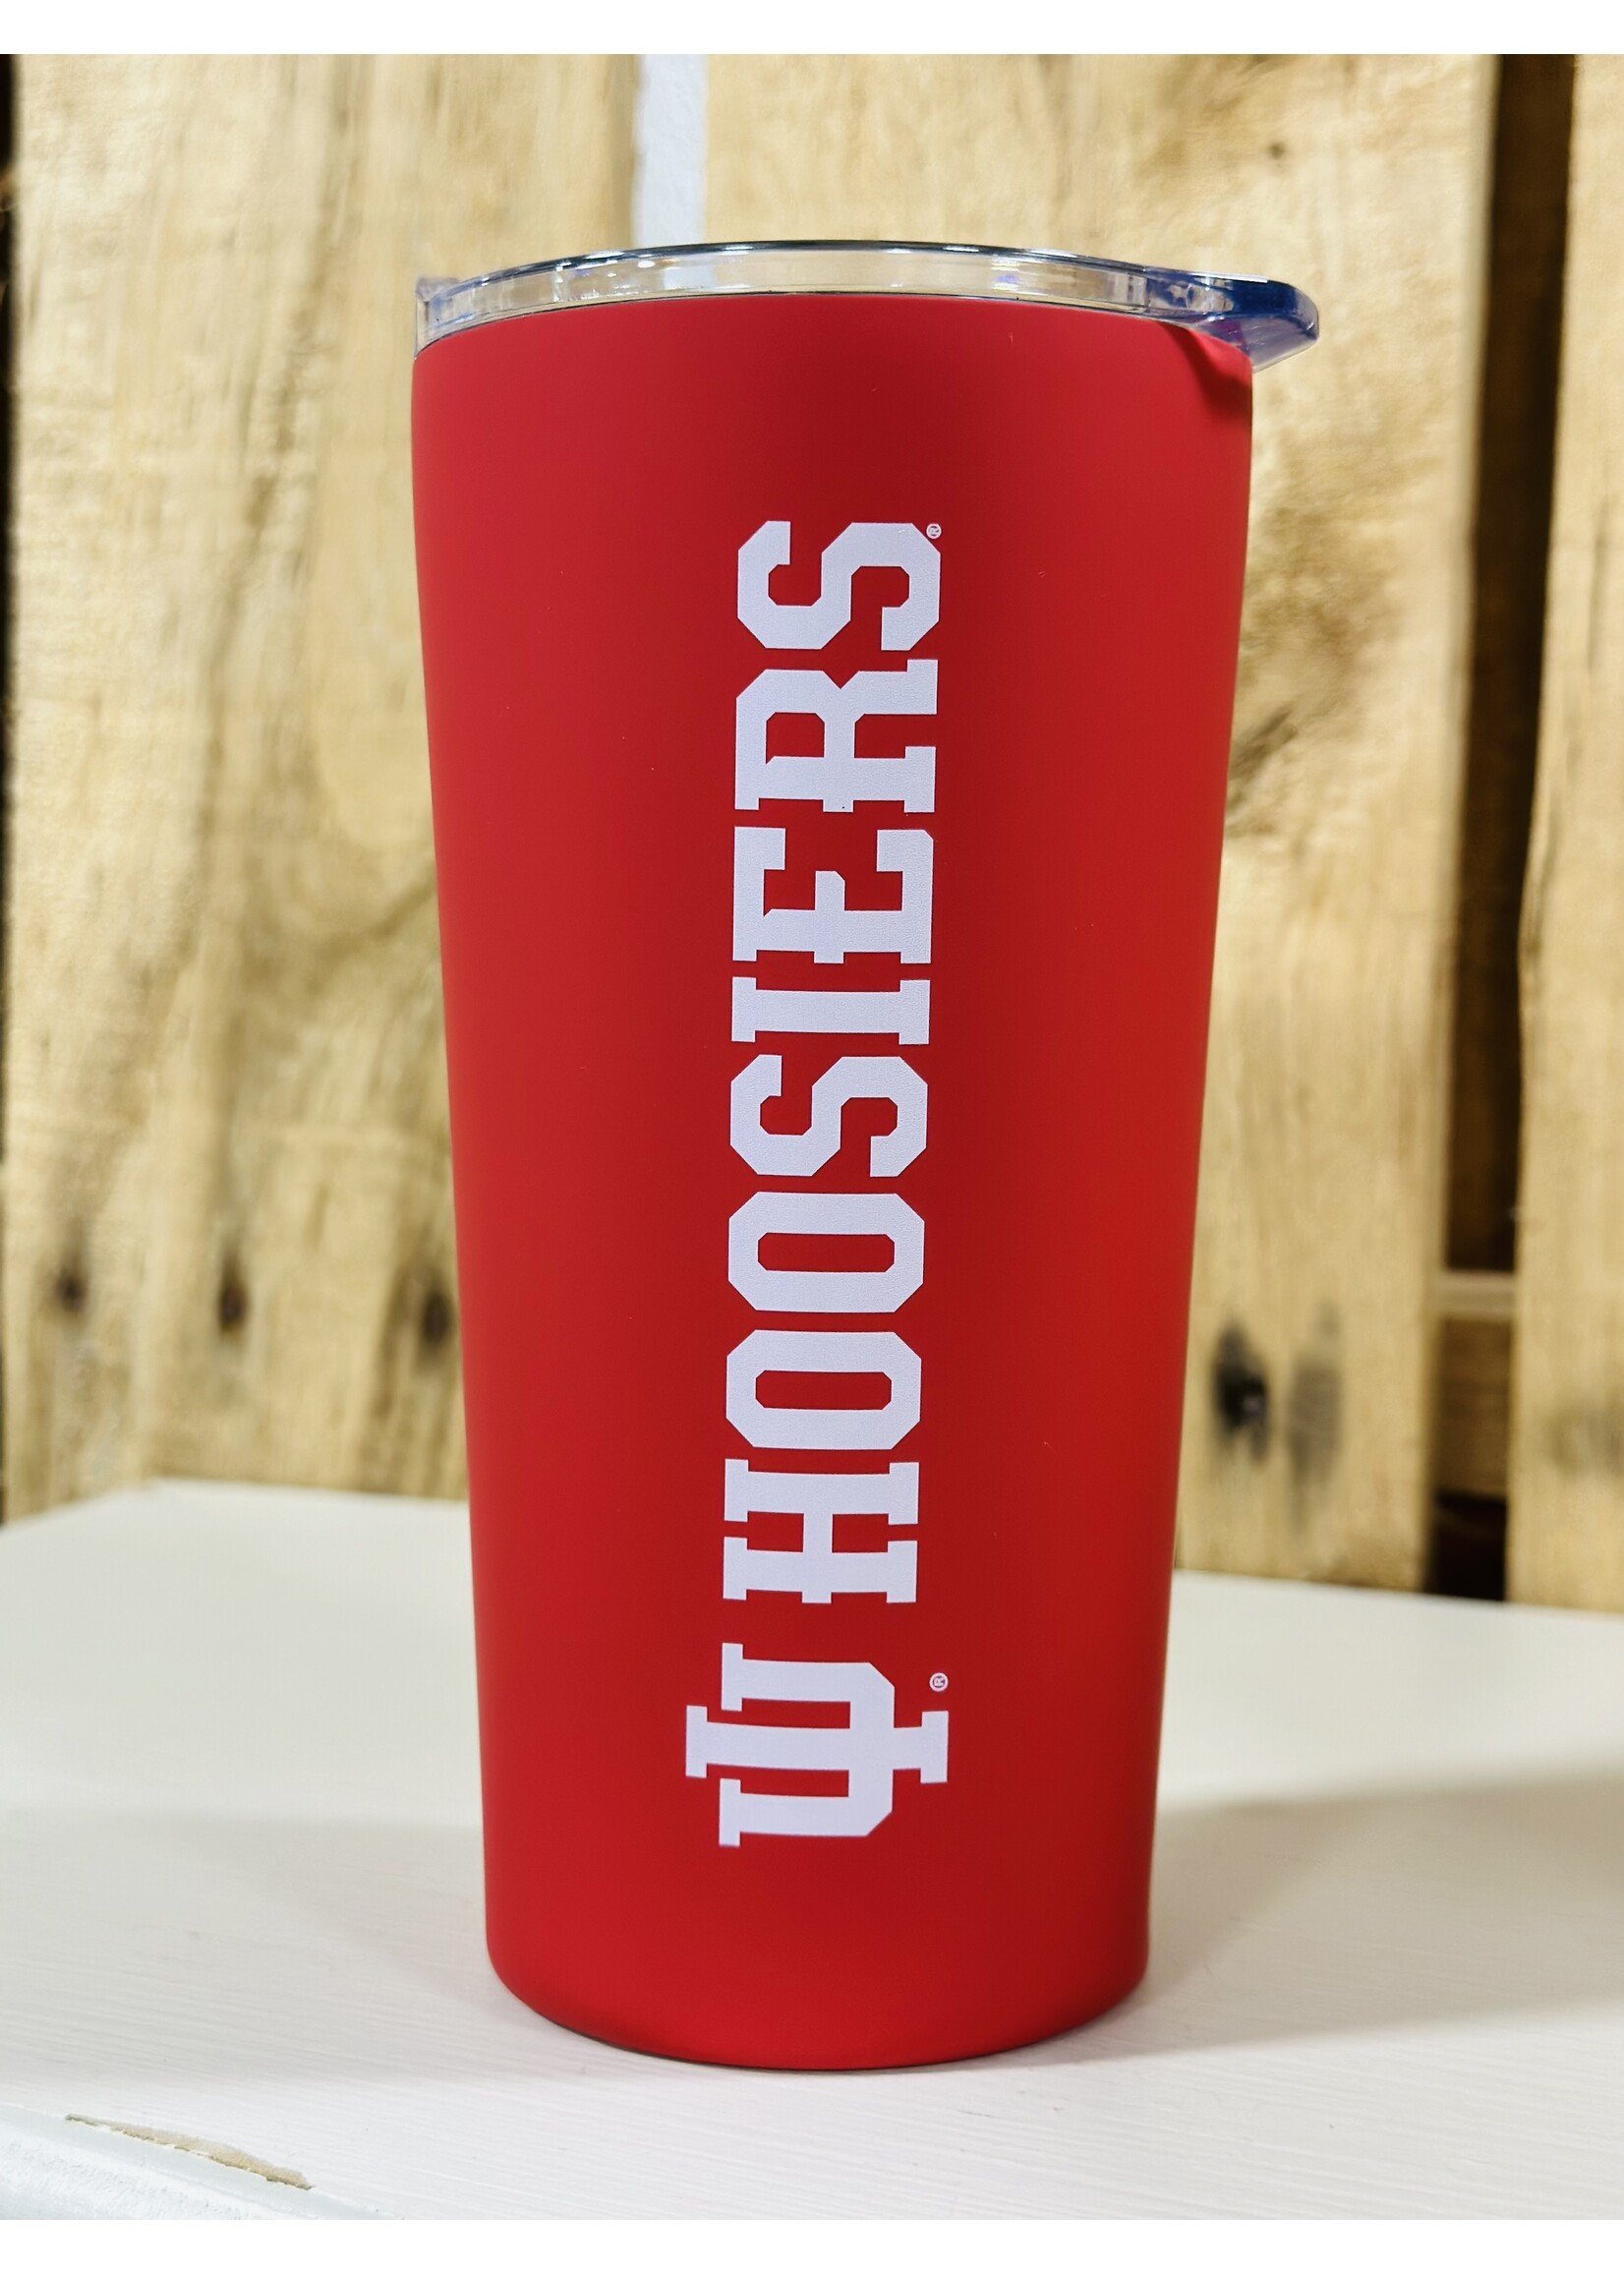 Indiana Hoosiers 18oz Soft Touch Tumbler